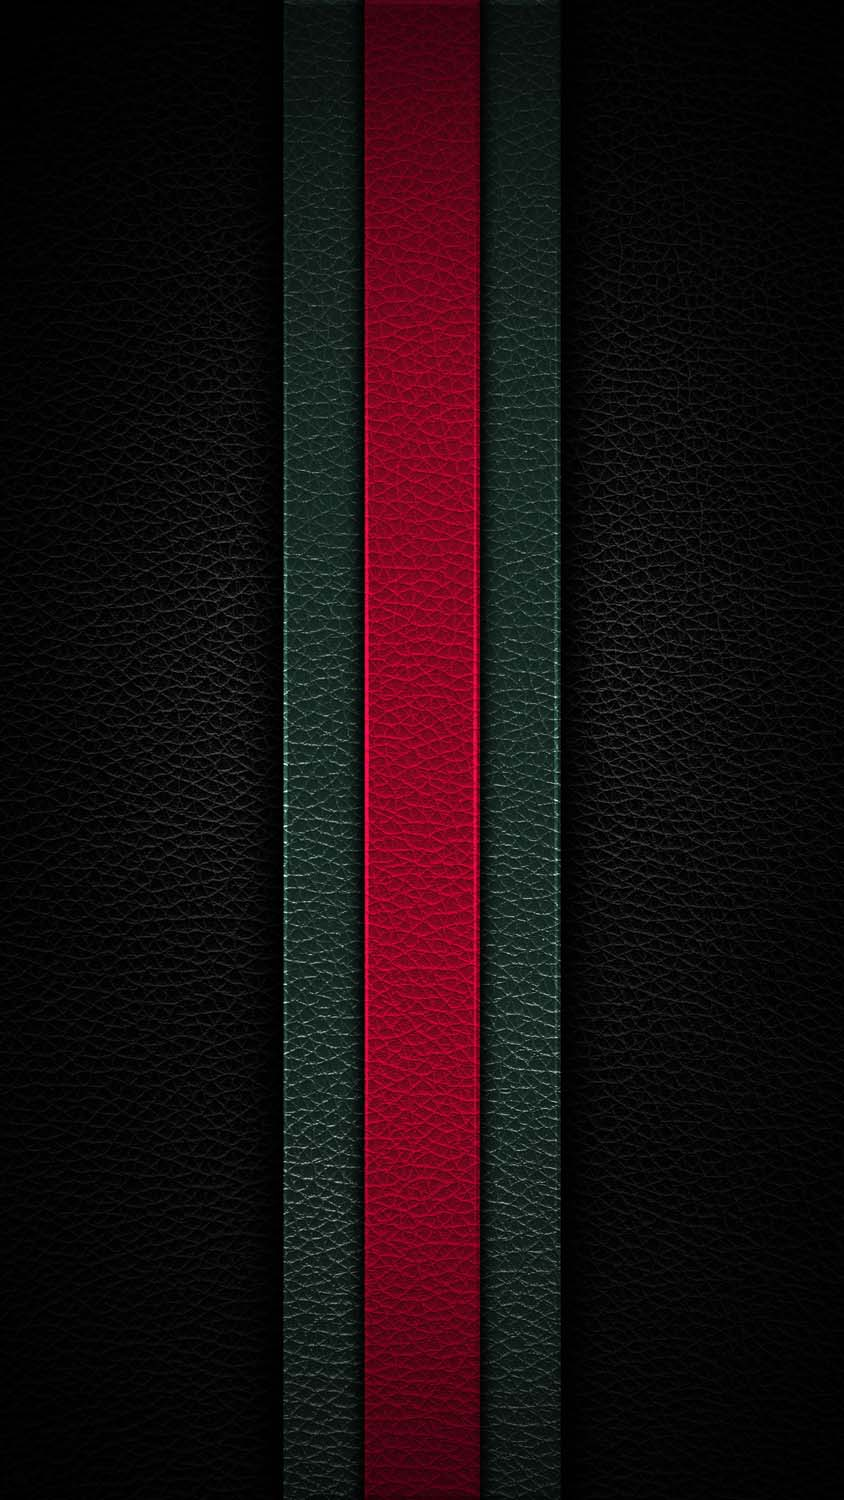 Luxury Leather Design IPhone Wallpaper HD  IPhone Wallpapers